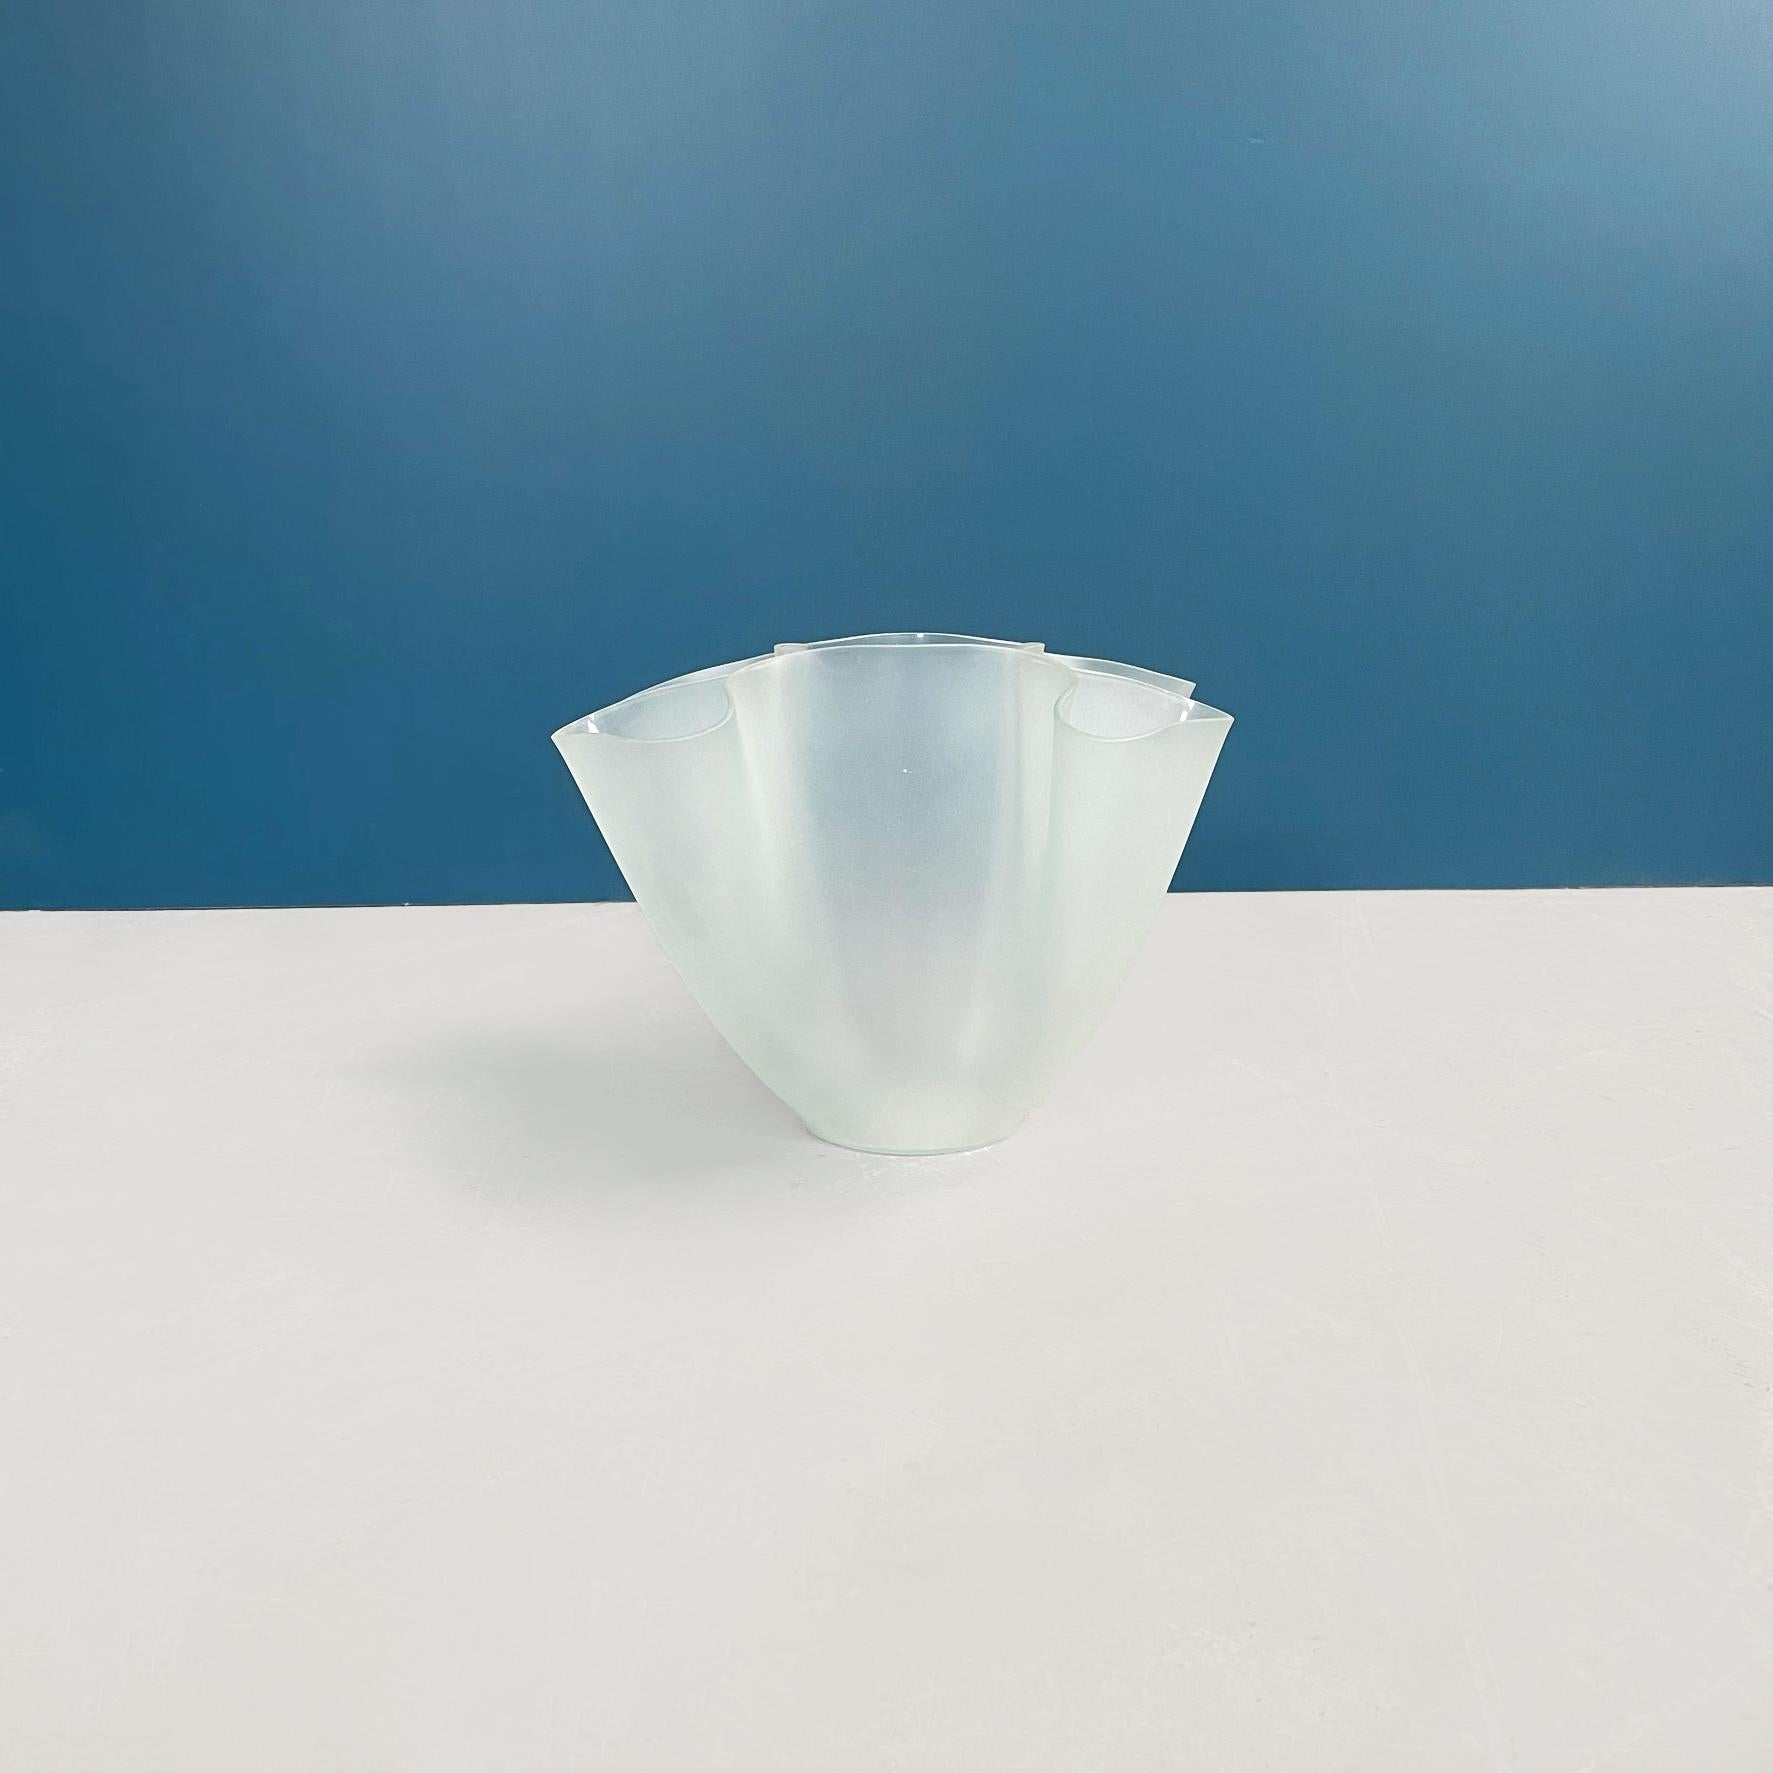 Italian Mid-Century Modern Vase Cartoccio in satin glass by Pietro Chiesa, 1940s
Vase model Cartoccio of irregularly shaped in satin glass.
Designed by Pietro Chiesa in 1940s.
Very good conditions
Measurements in cm 35x35x24h.

.